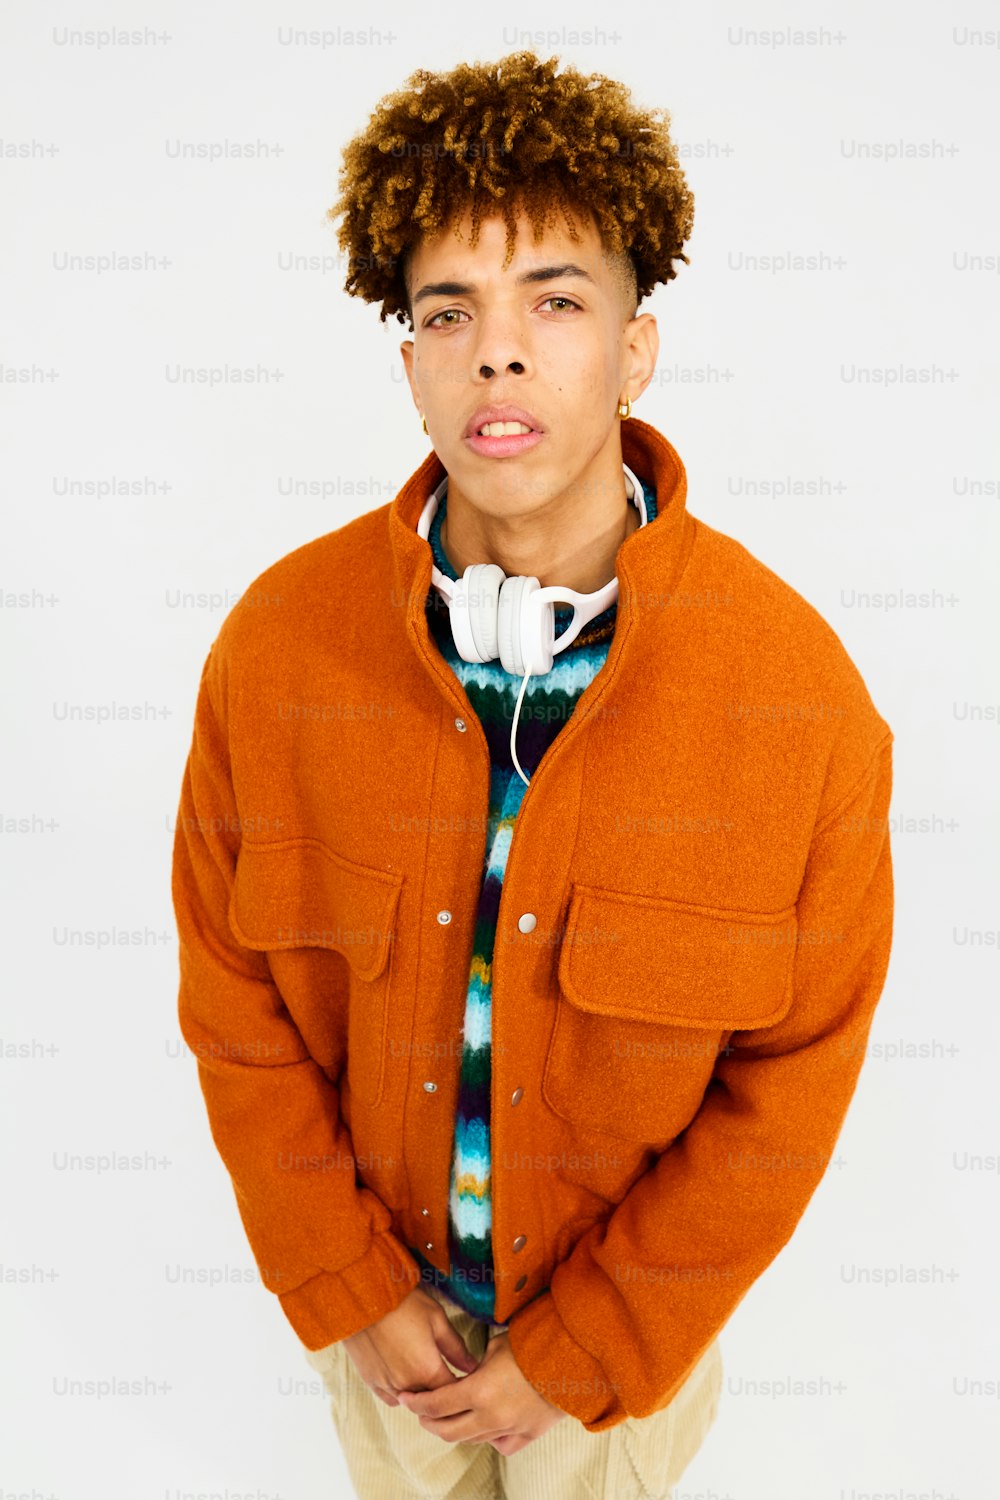 a young man with curly hair wearing an orange jacket